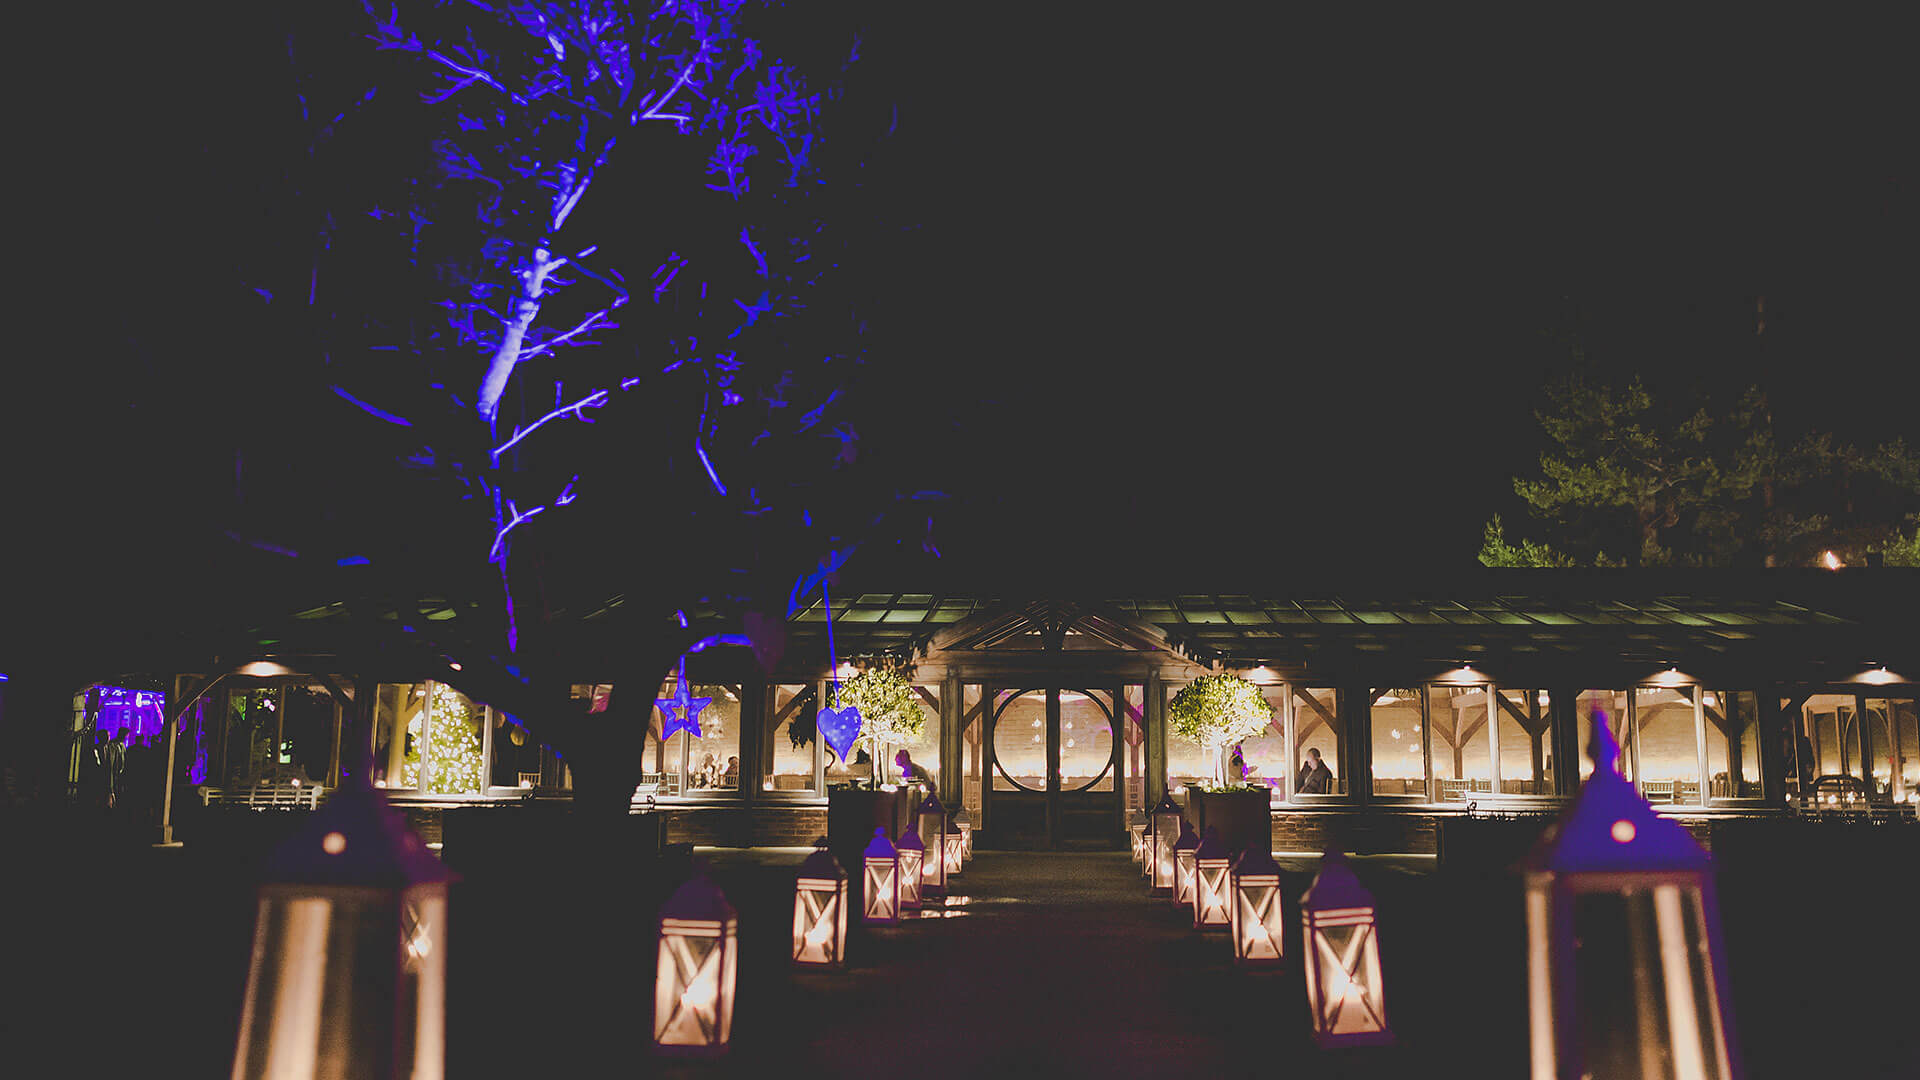 The Long Walk outdoor wedding aisle is lined with lanterns at night - romantic wedding venues in Essex